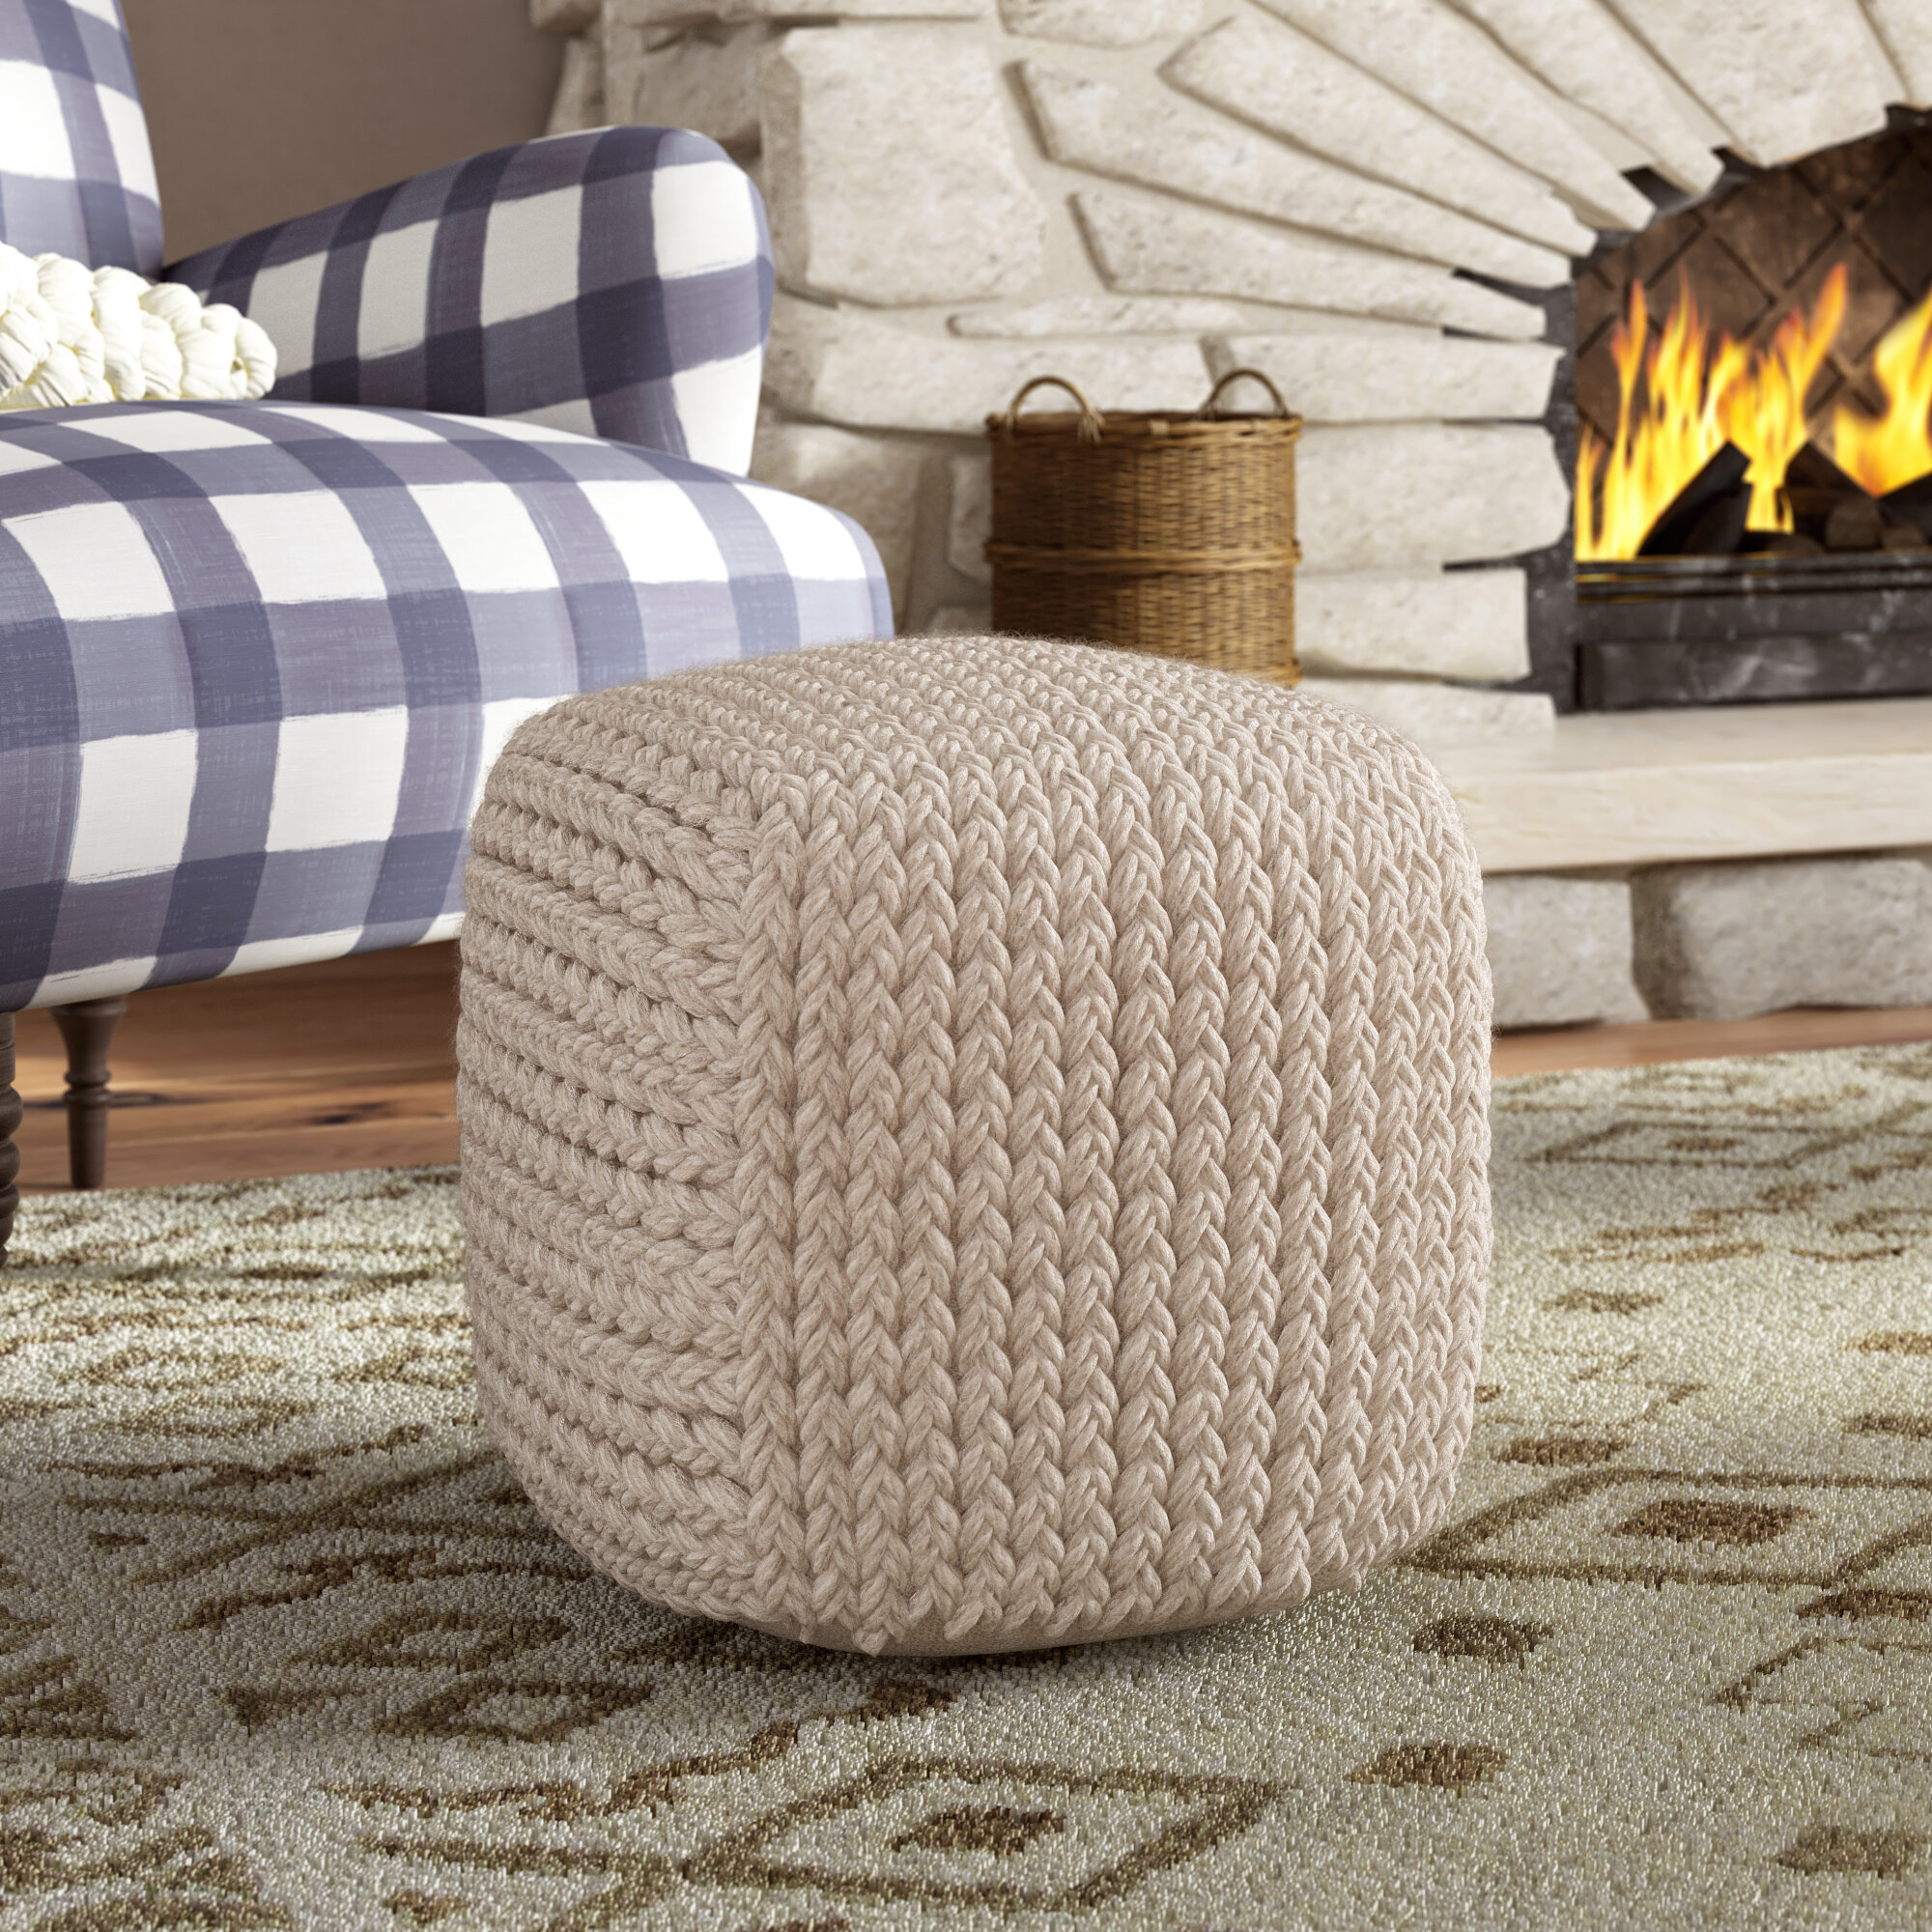 Sand Stable Aubree 16 Wide Square Pouf Ottoman With Storage Reviews Wayfair